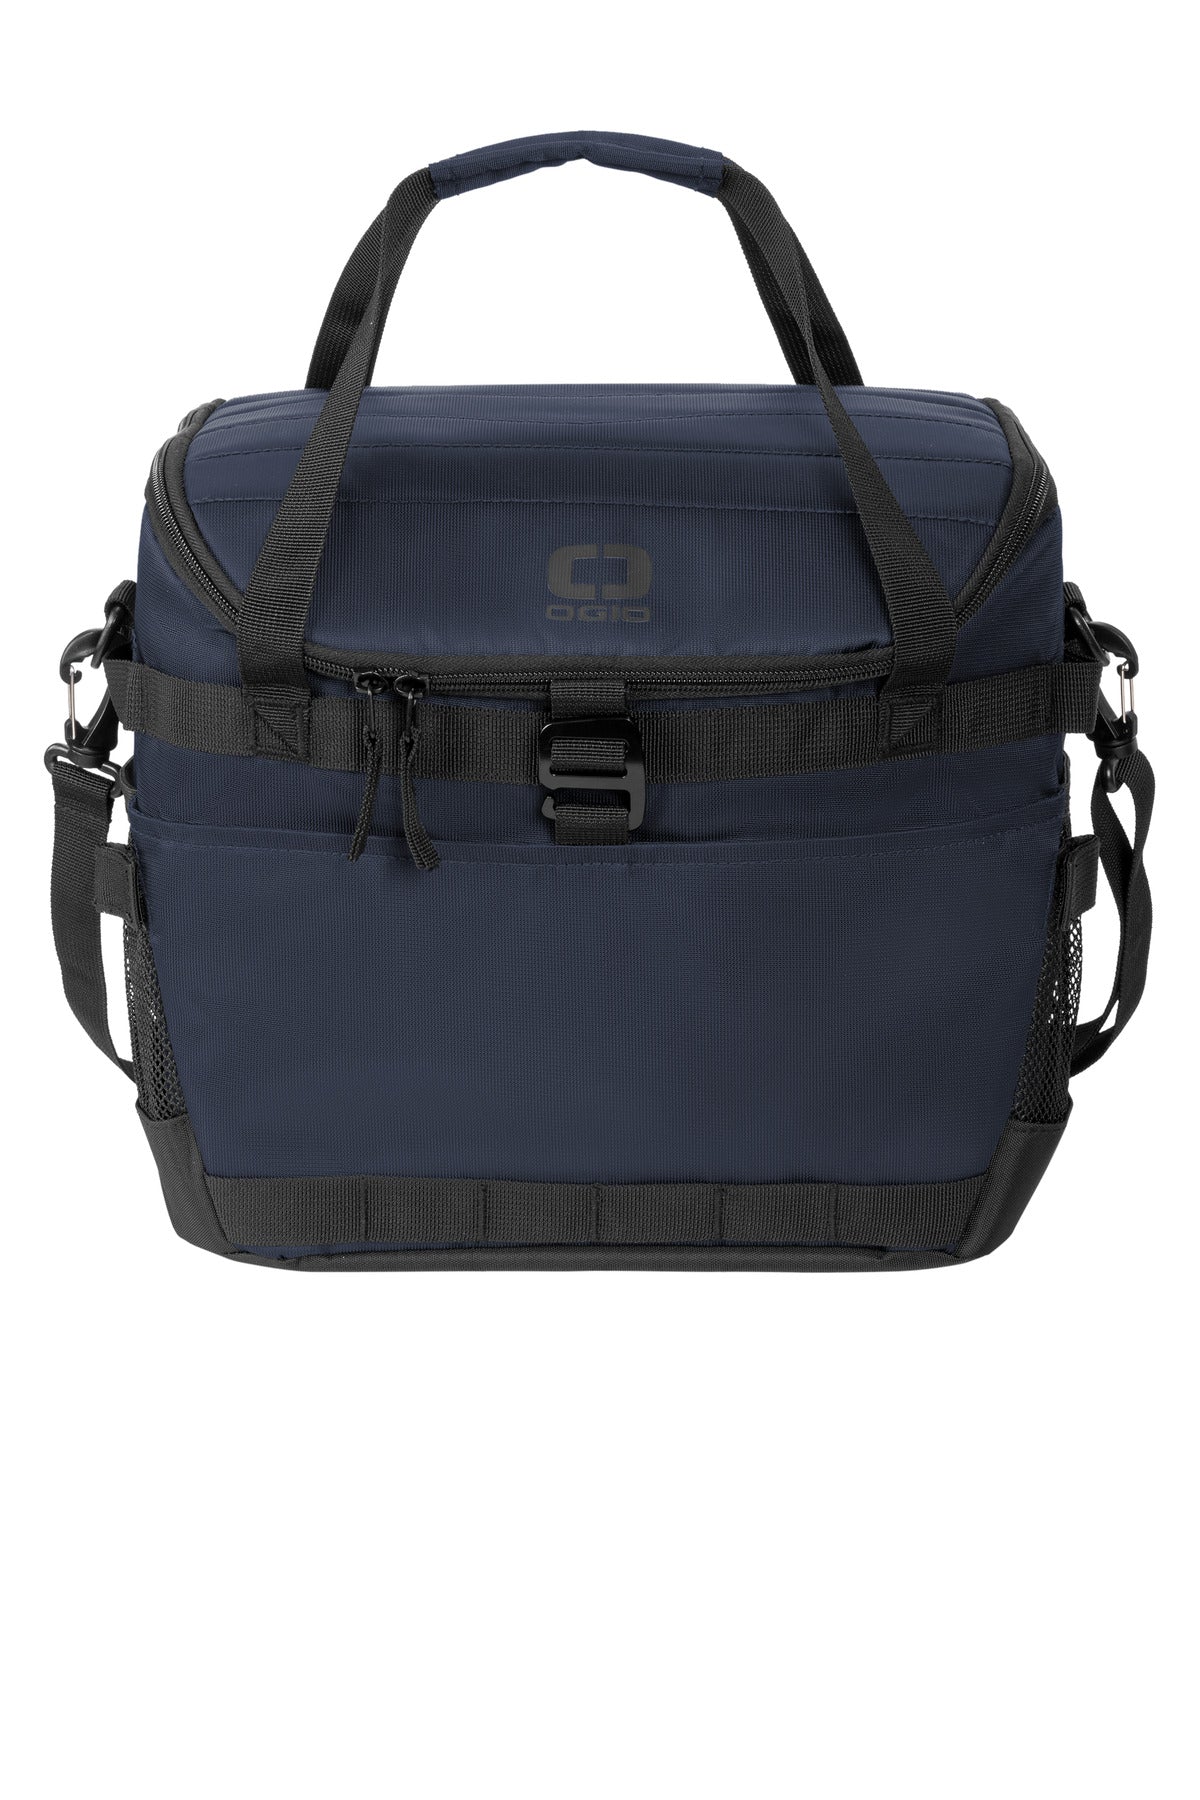 Photo of OGIO Bags 96002  color  River Blue Navy